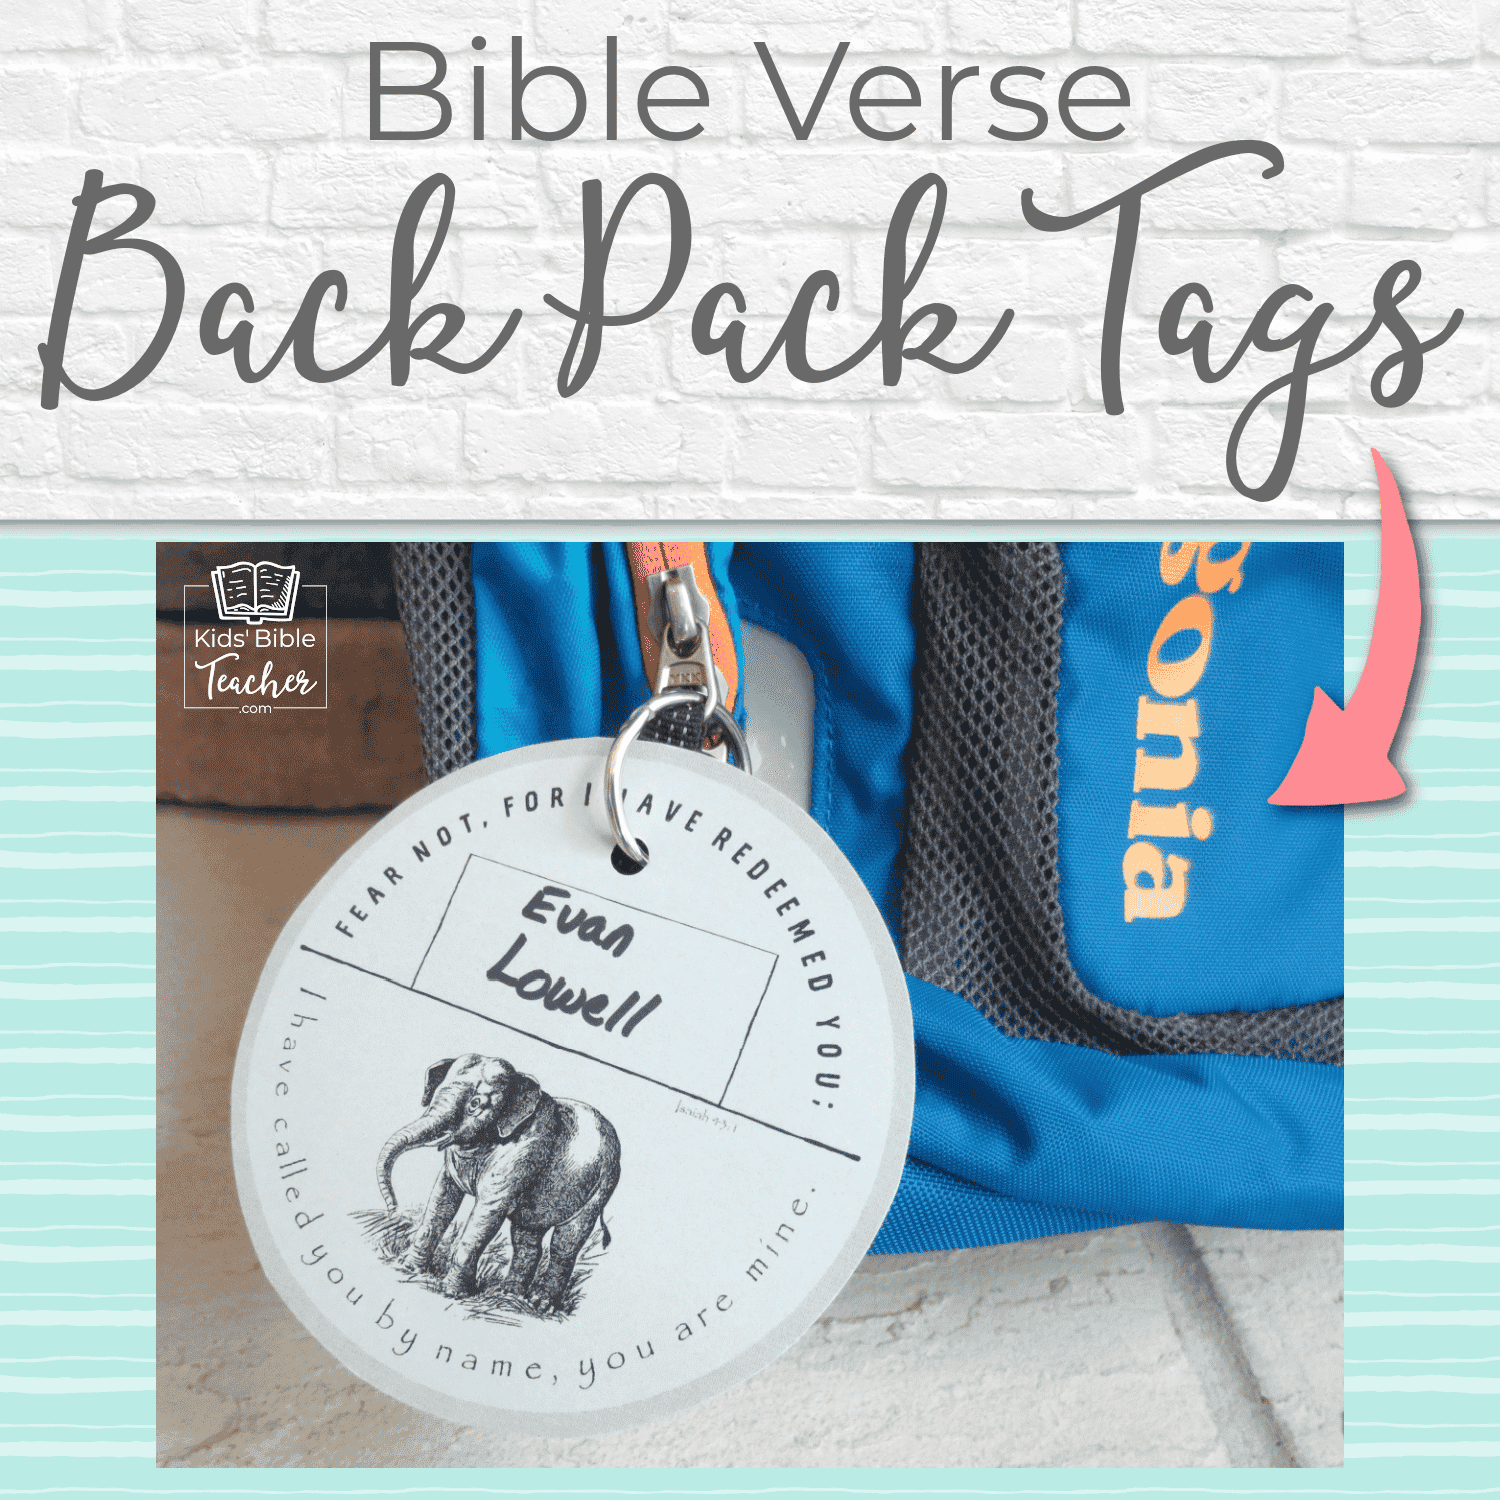 Bible Verse Printable Name s From Path Through The Narrow Gate